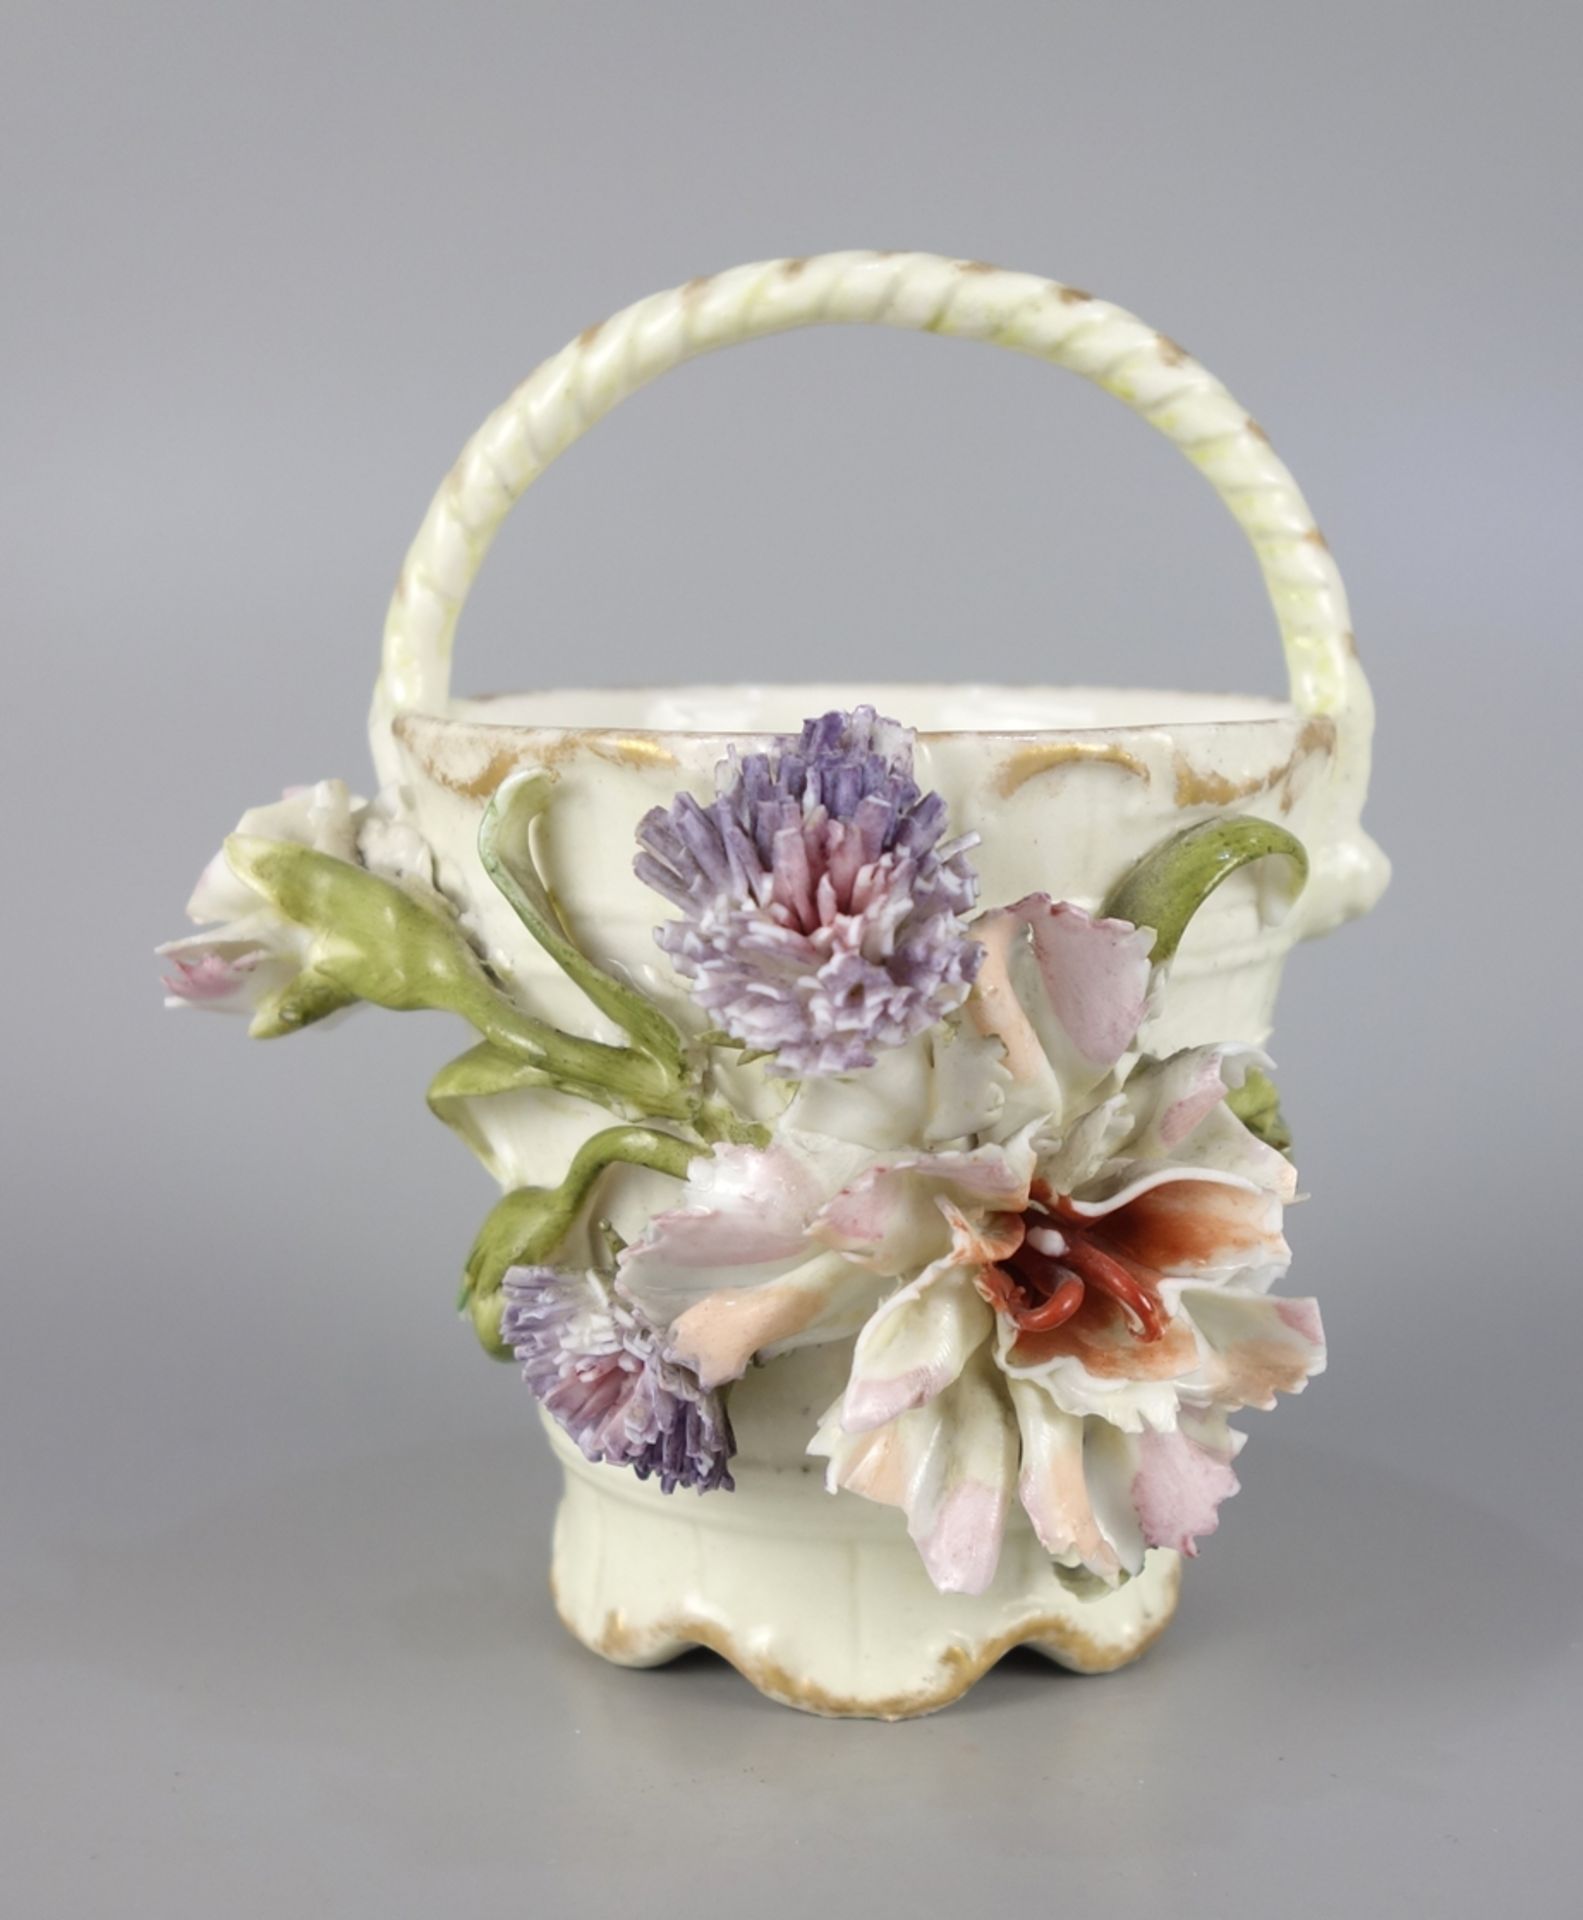 Basket with handle and three-dimensiol blossoms, Schierholz&Sohn, Plaue, Thuringia, 2nd half 19th c